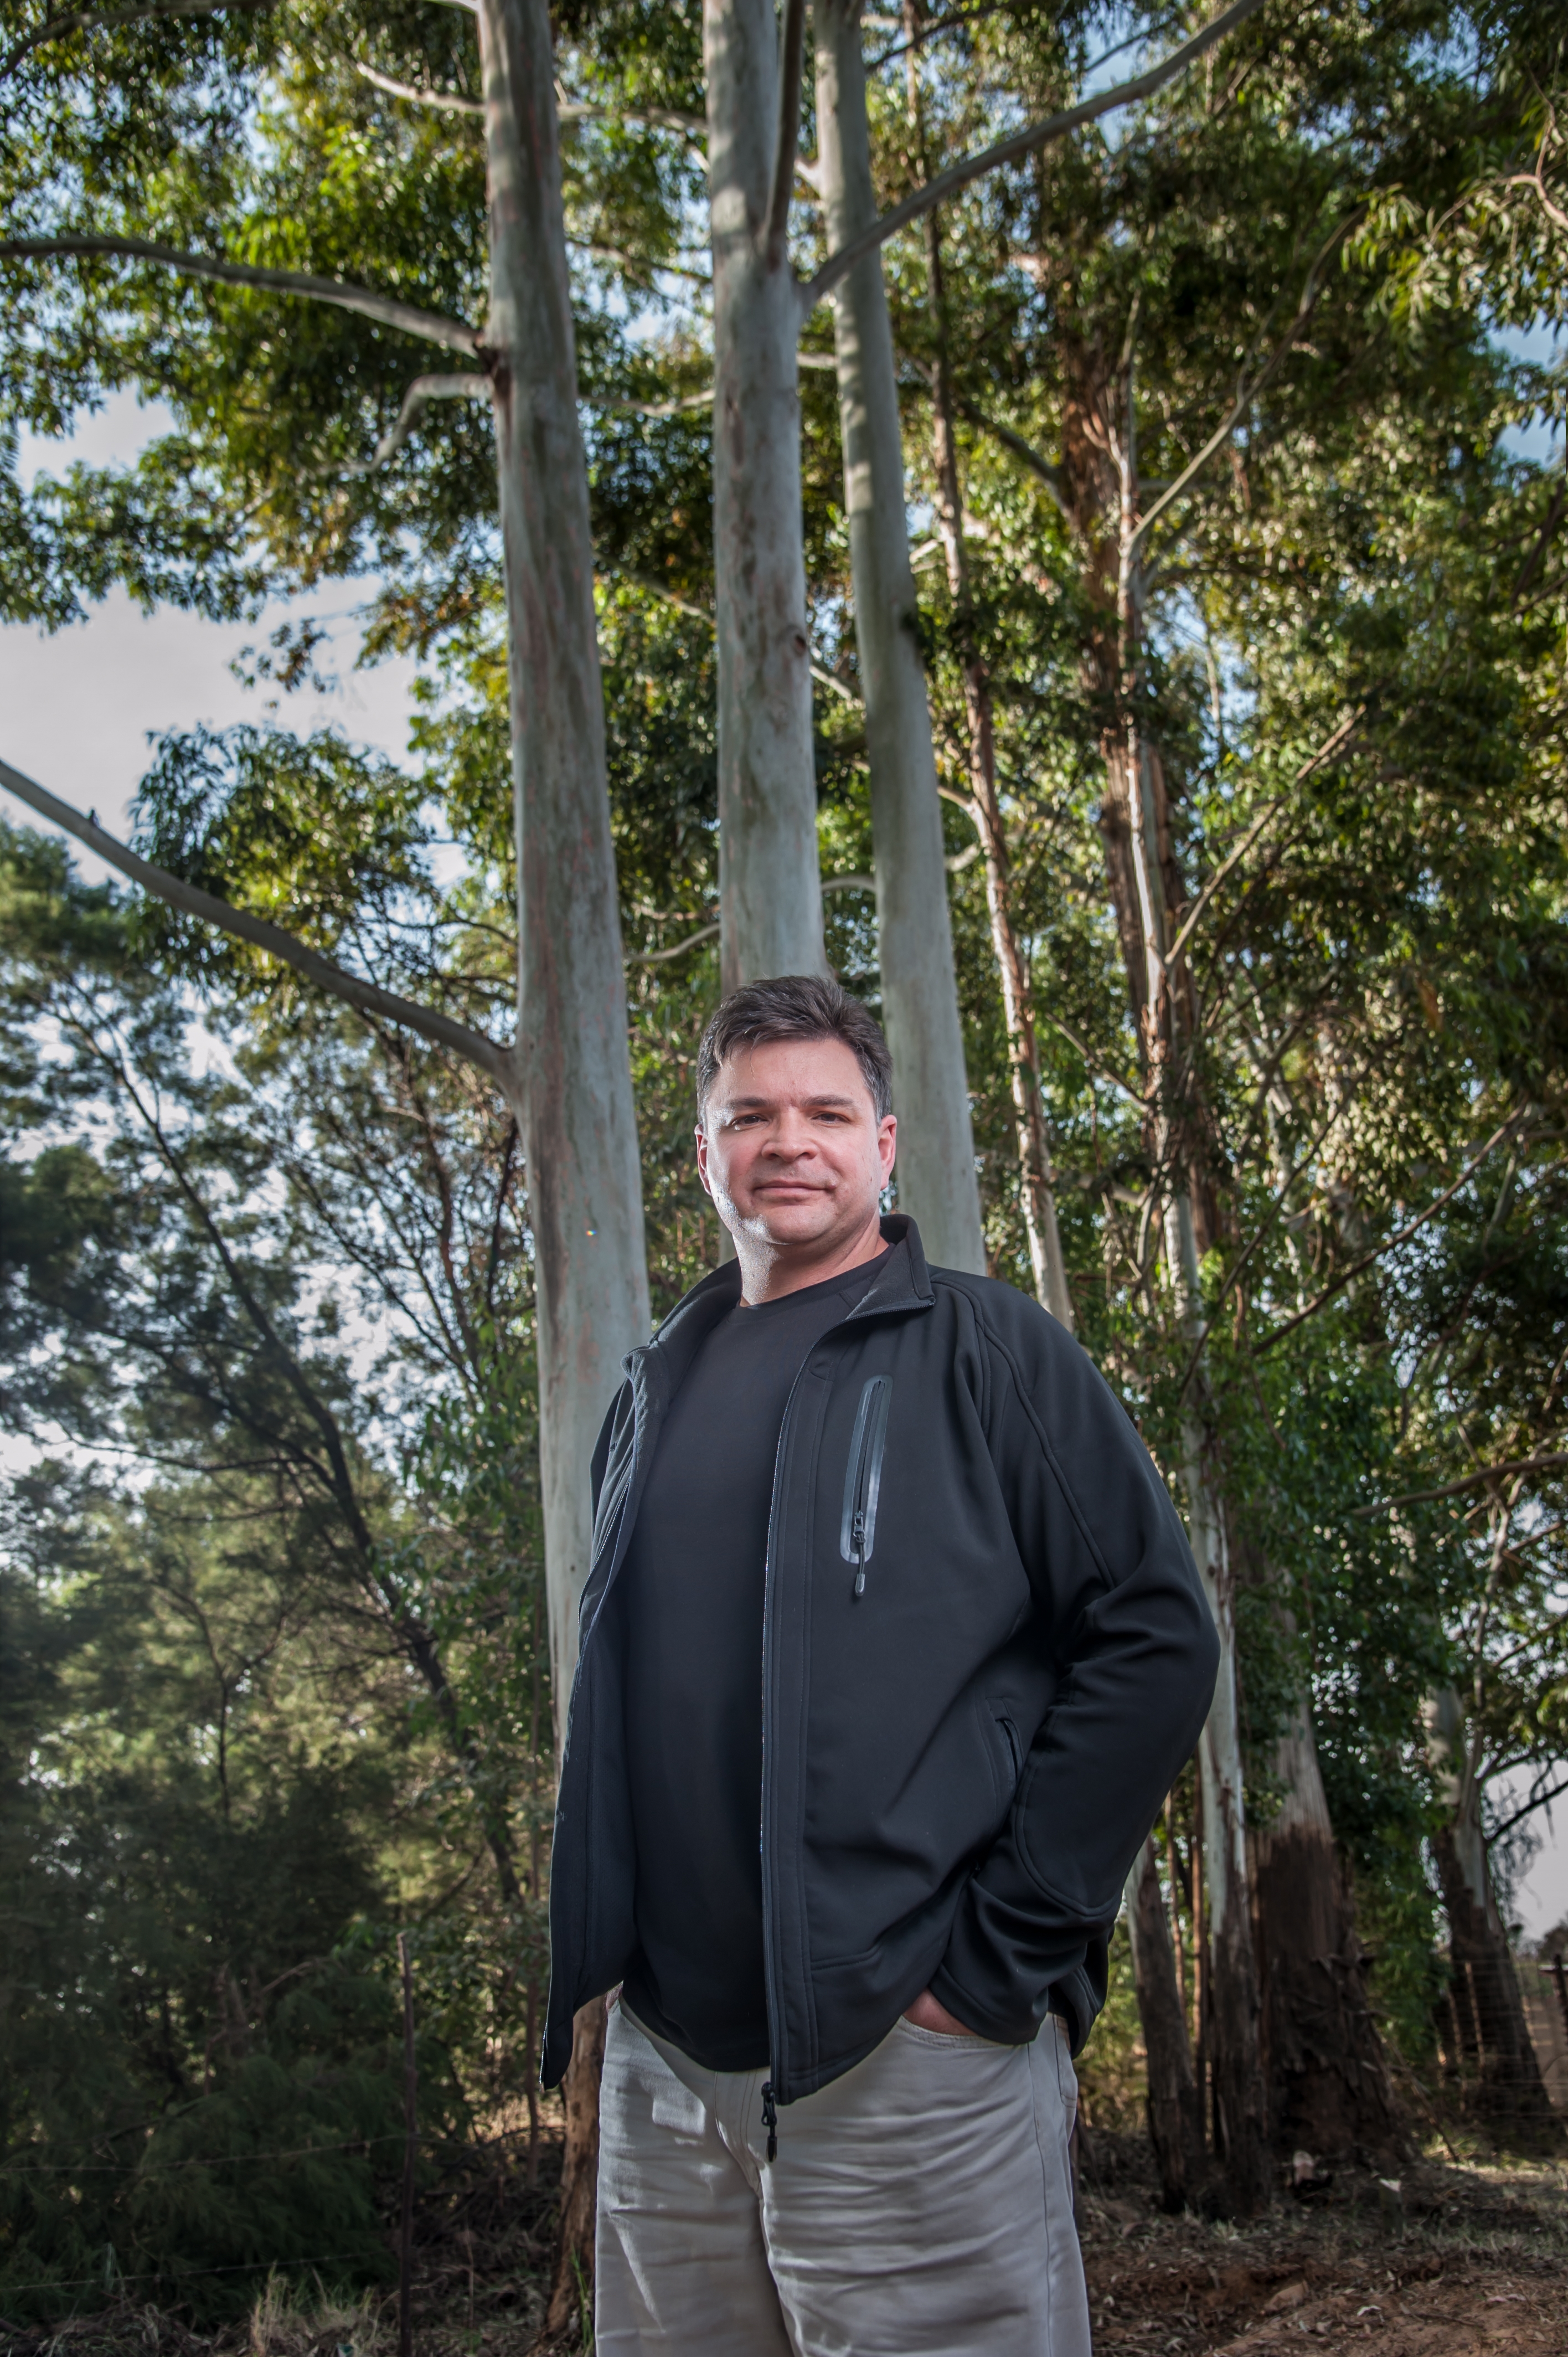 Professor Zander Myburg of the University of Pretoria, South Africa, in front of Eucalypt trees. Photo by Photowise.